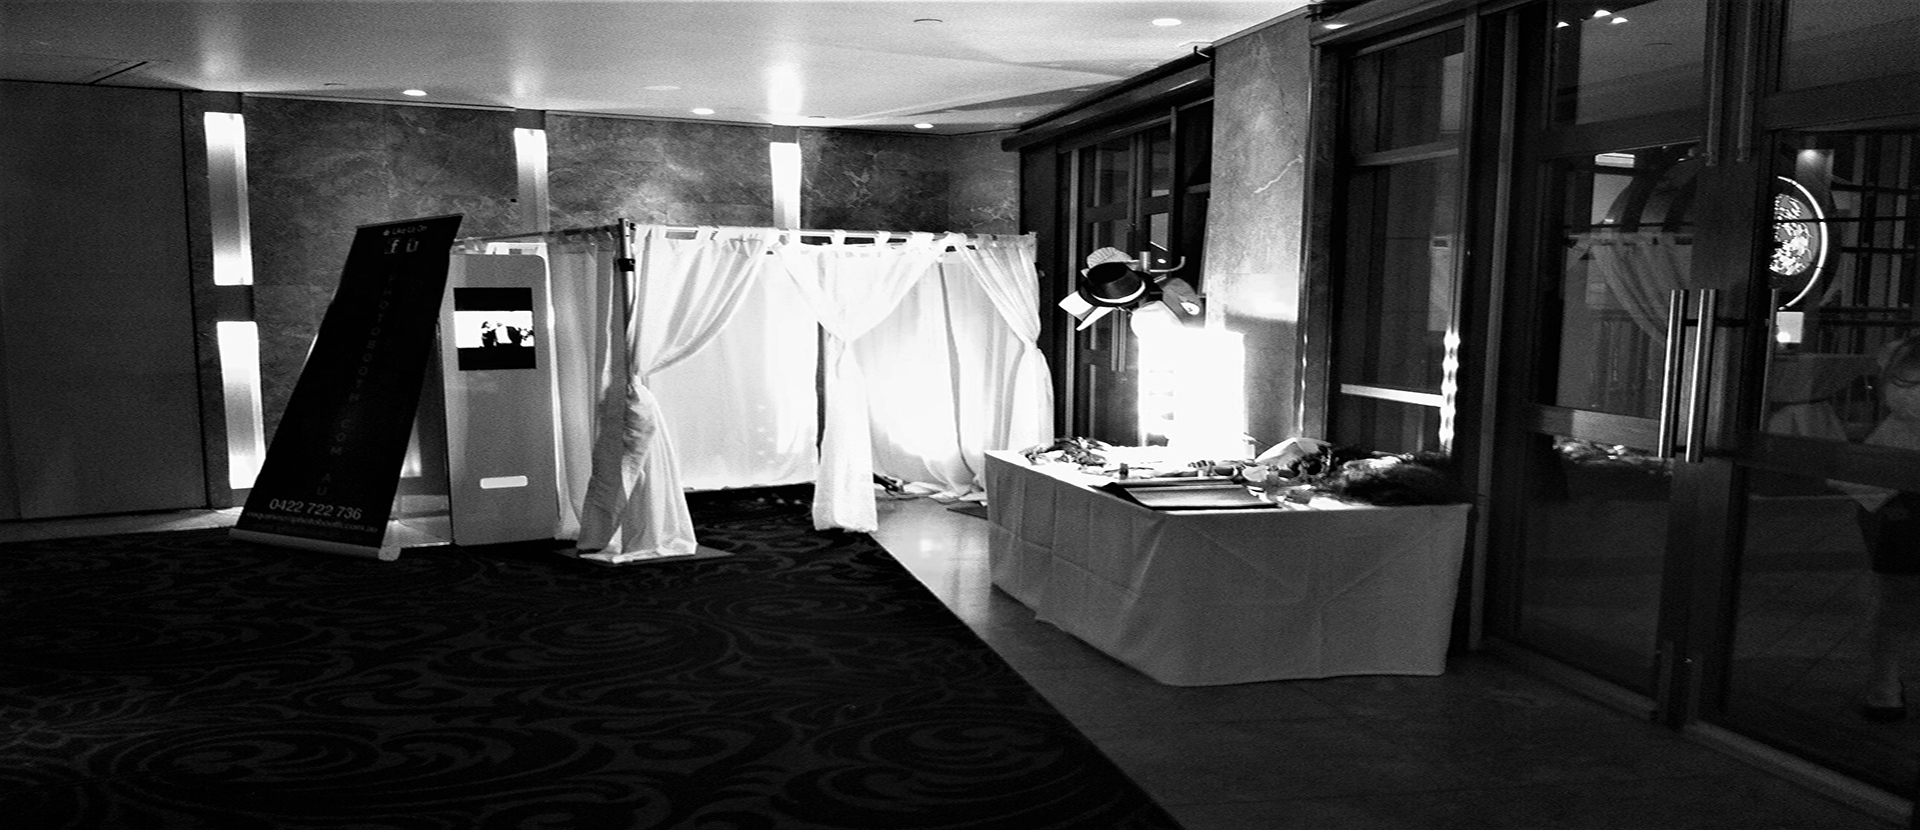 setup for an open photo booth in Sydney.